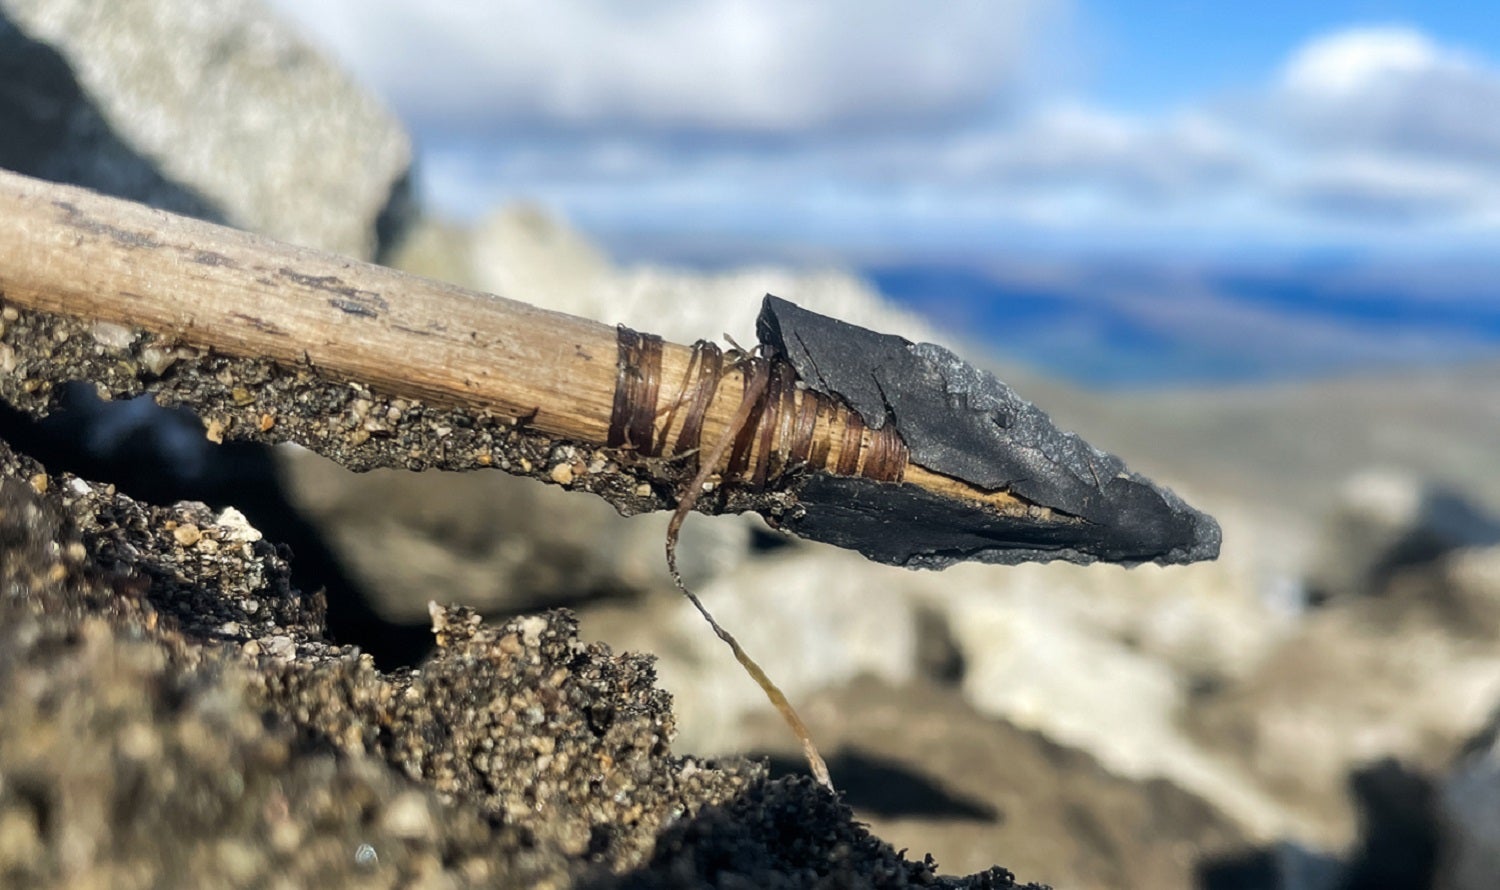 Arrow artifact from Bronze Age found in melting glacier in Norway